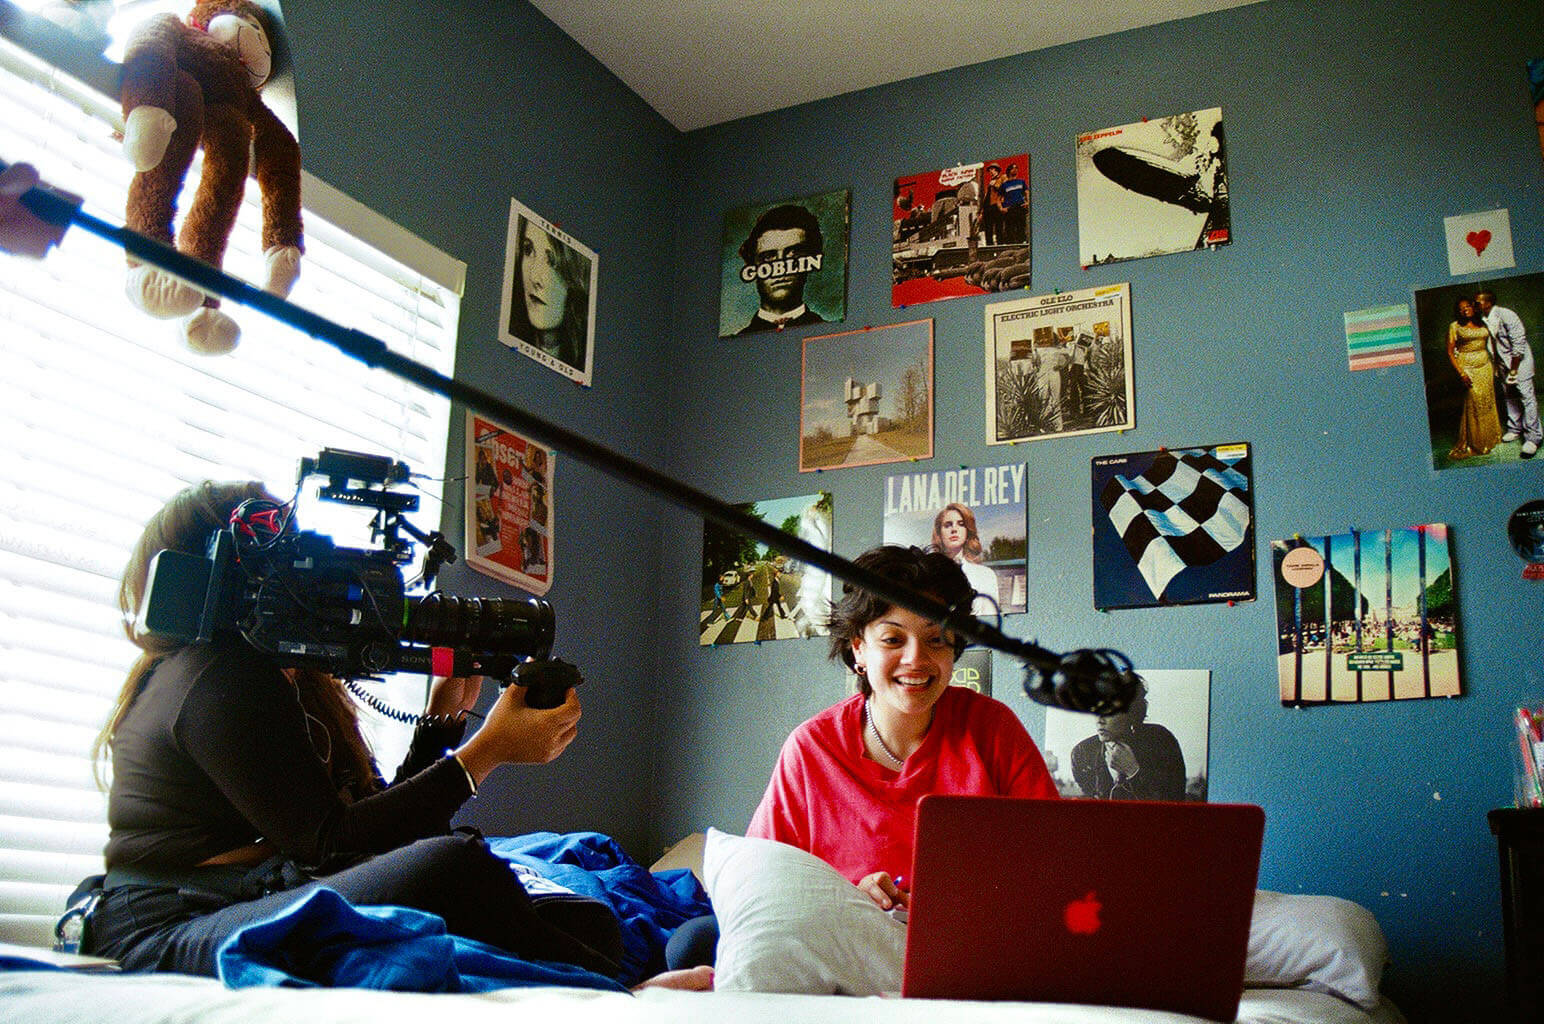 Still from Mija. A woman is sitting on her bed, smiling at her laptop. Another woman is sitting on the bed holding a camera on her shoulder, filming the other woman. There is also a boom mic in the center.